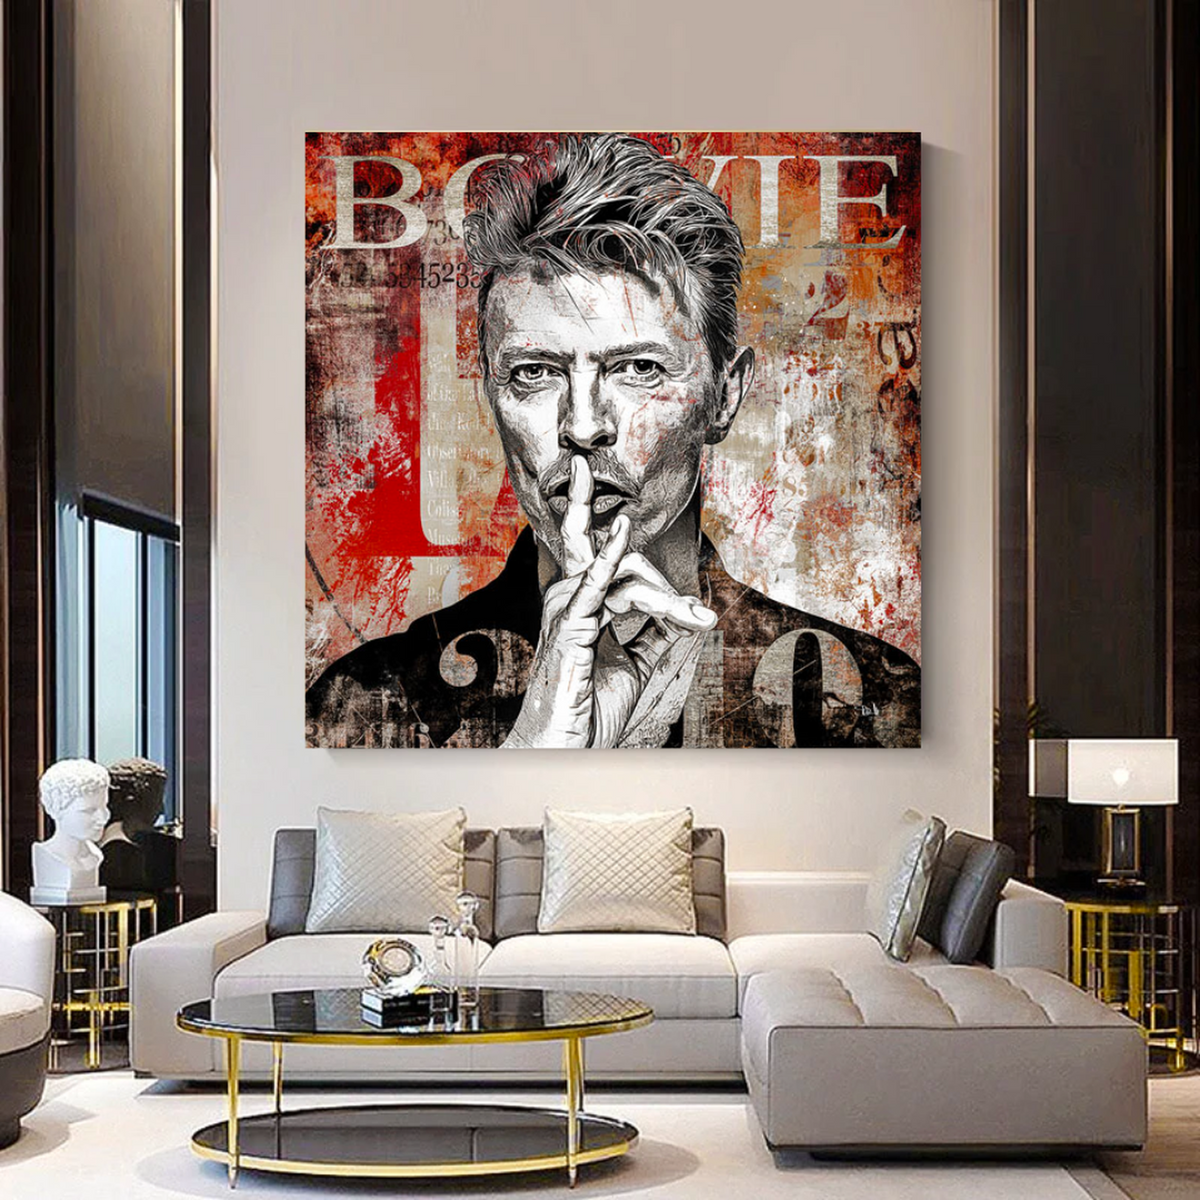 David Bowie Canvas Wall Art Unique and Iconic Masterpieces